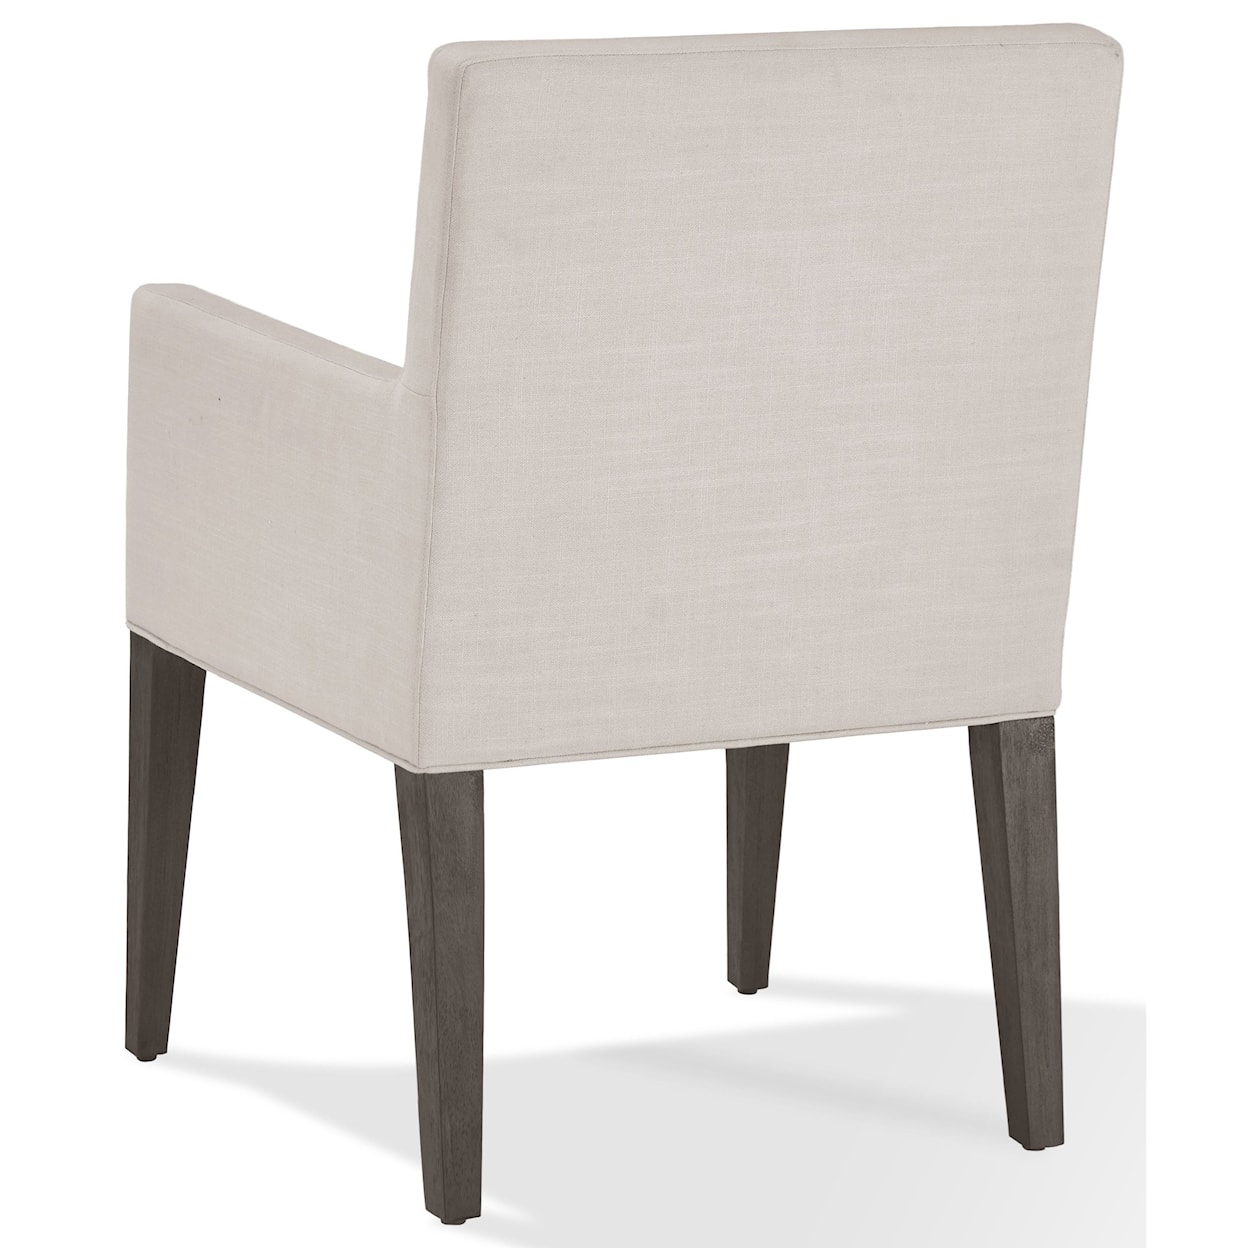 Modus International Modesto Upholstered Arm Chair in French Roast